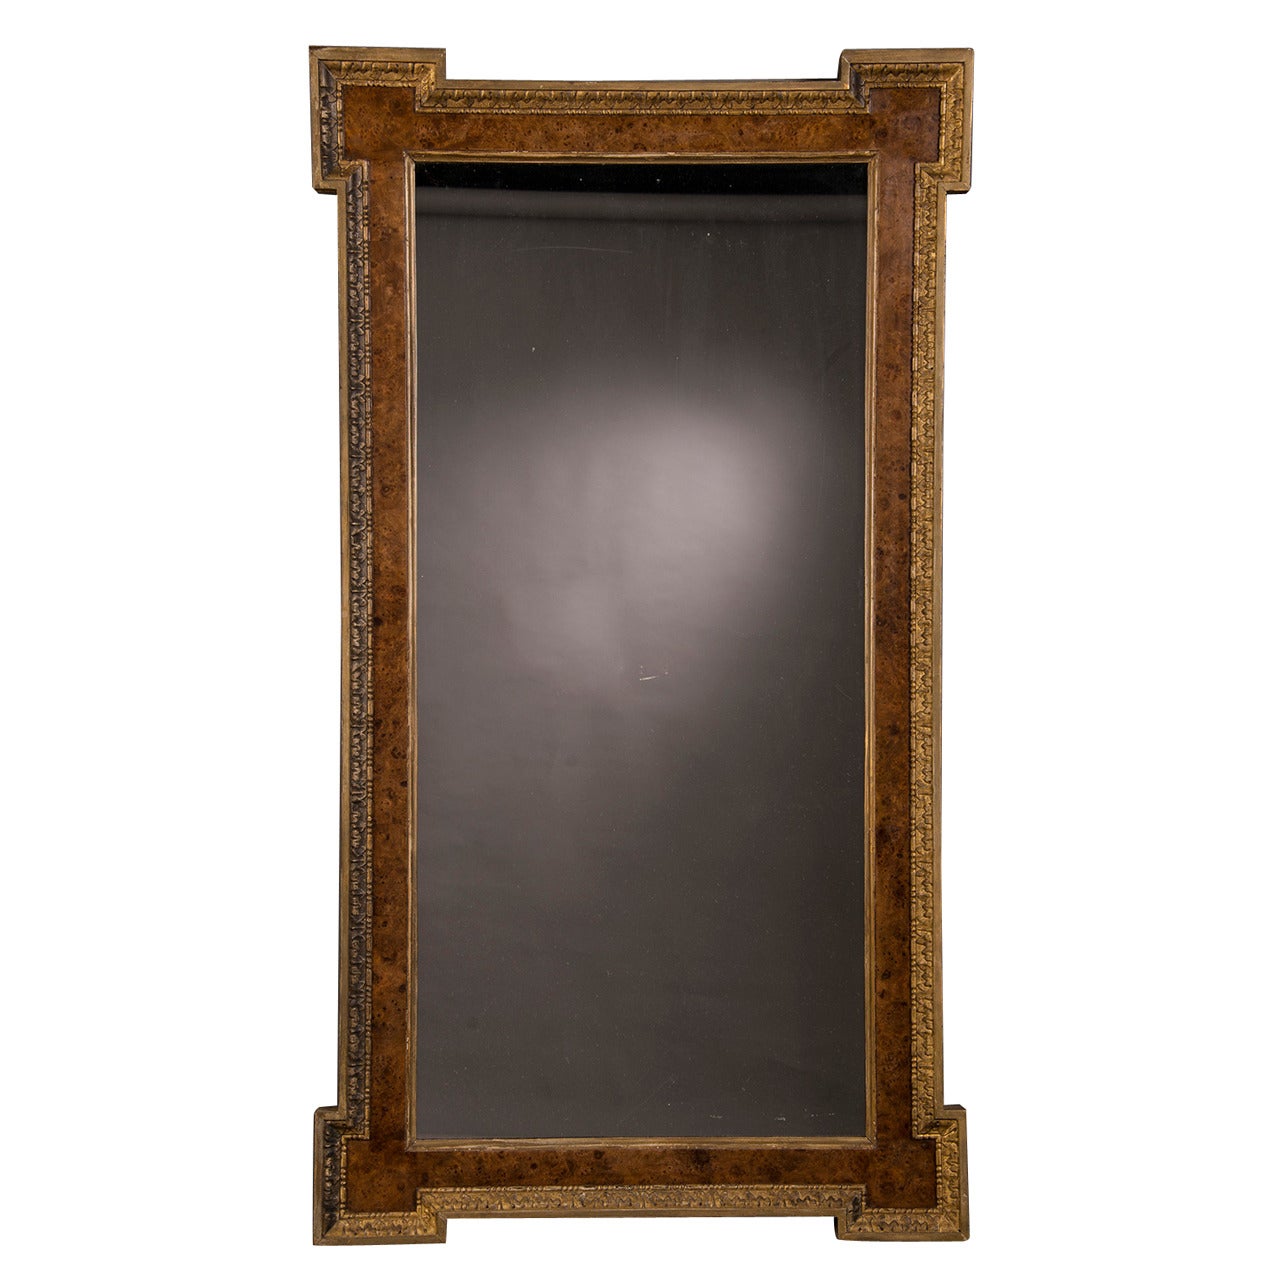 William Kent Burl Elm and Gilded Mirror, England circa 1875 (43"w x 61 1/2"h) For Sale